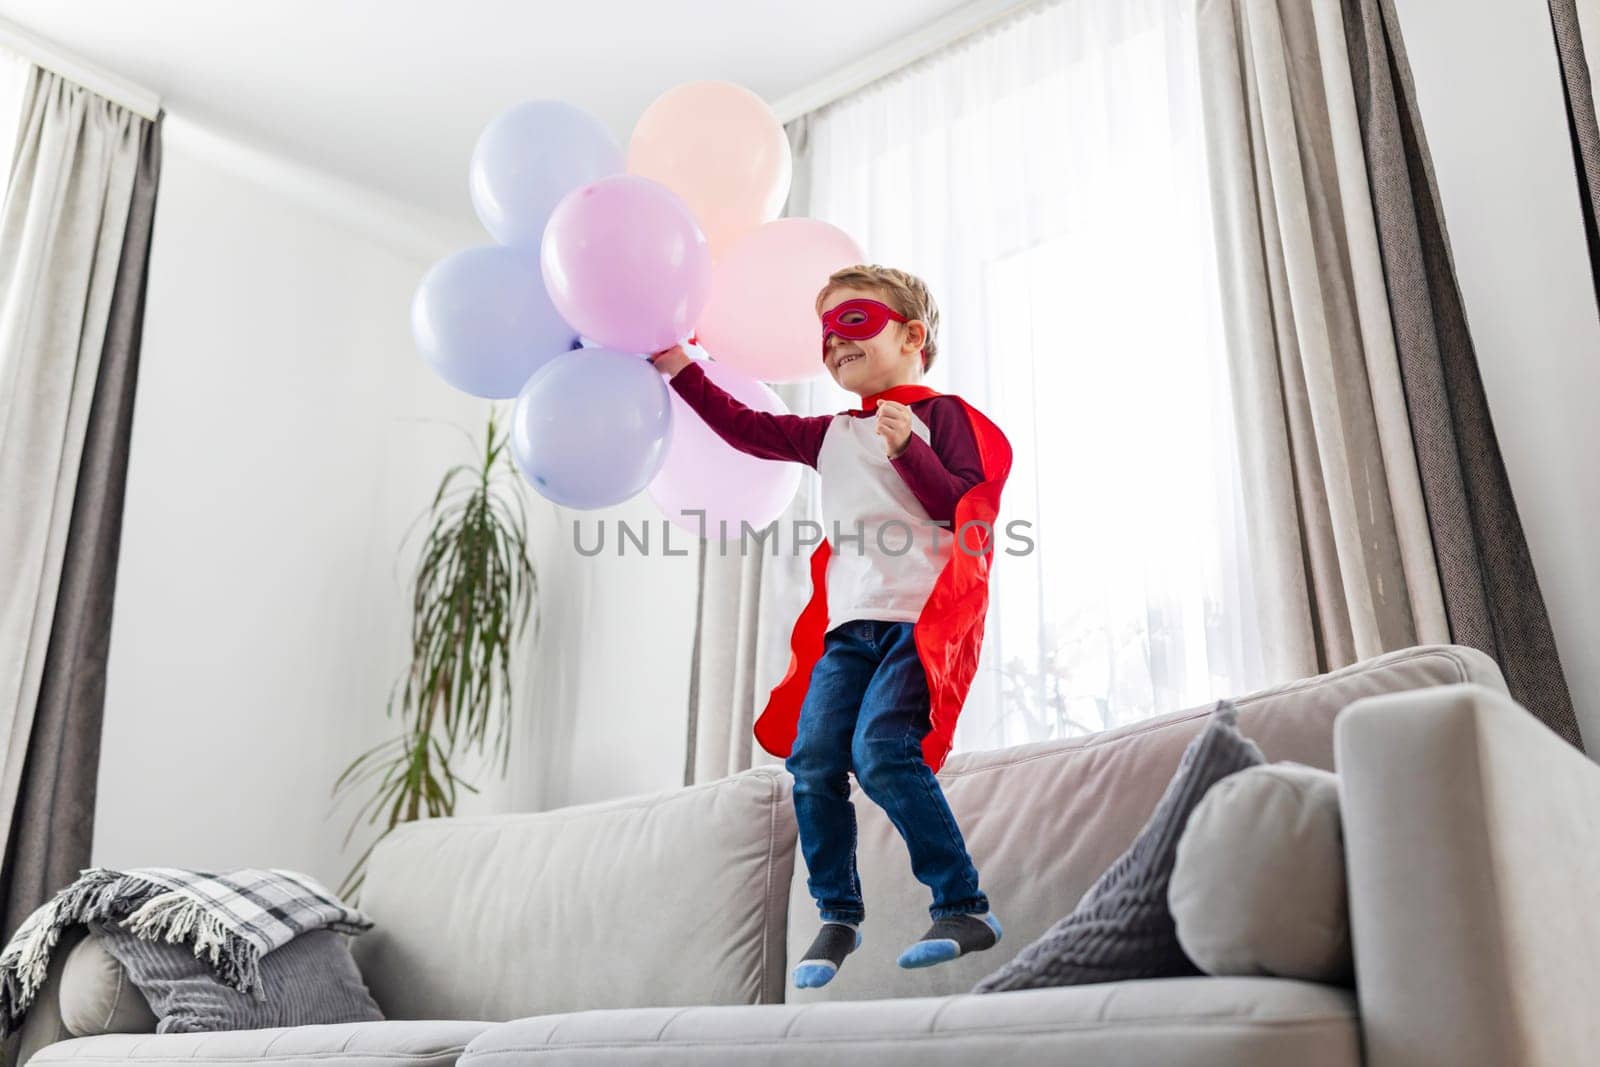 Happy boy in superhero costume playing with balloons, indoor fun. Dynamic kid portrait for invitation and greeting.